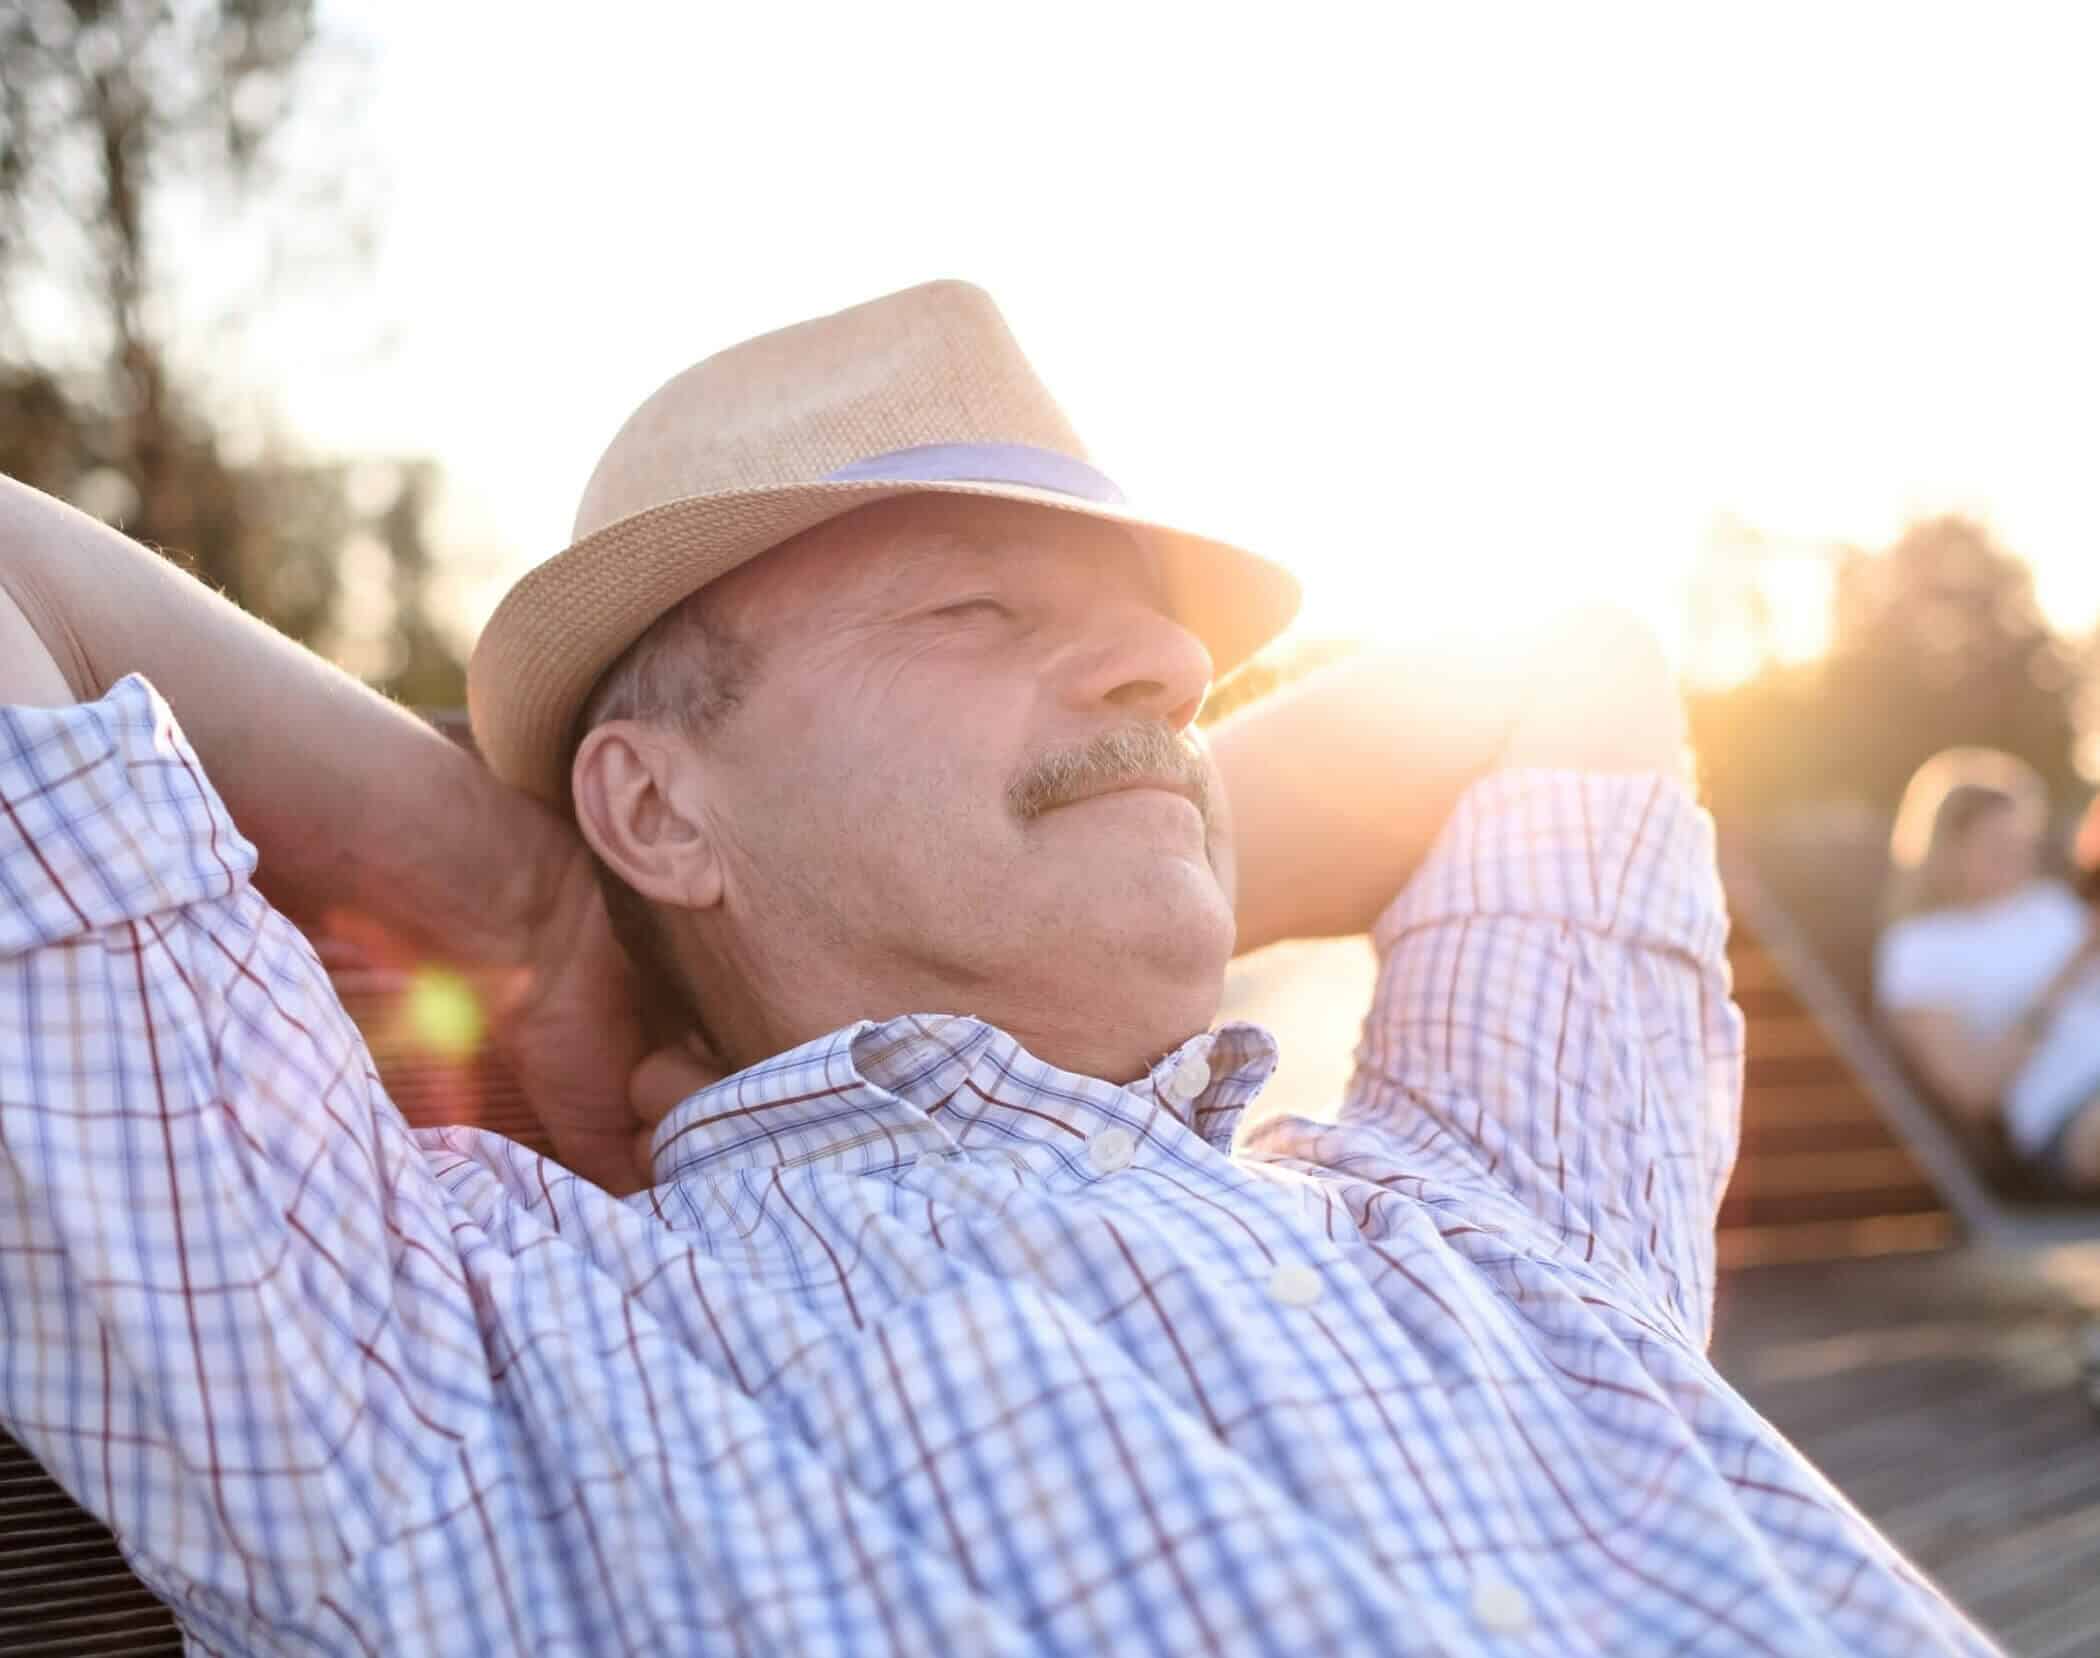 Man lays back in an outside chair with hands behind his head enjoying the sunshine.